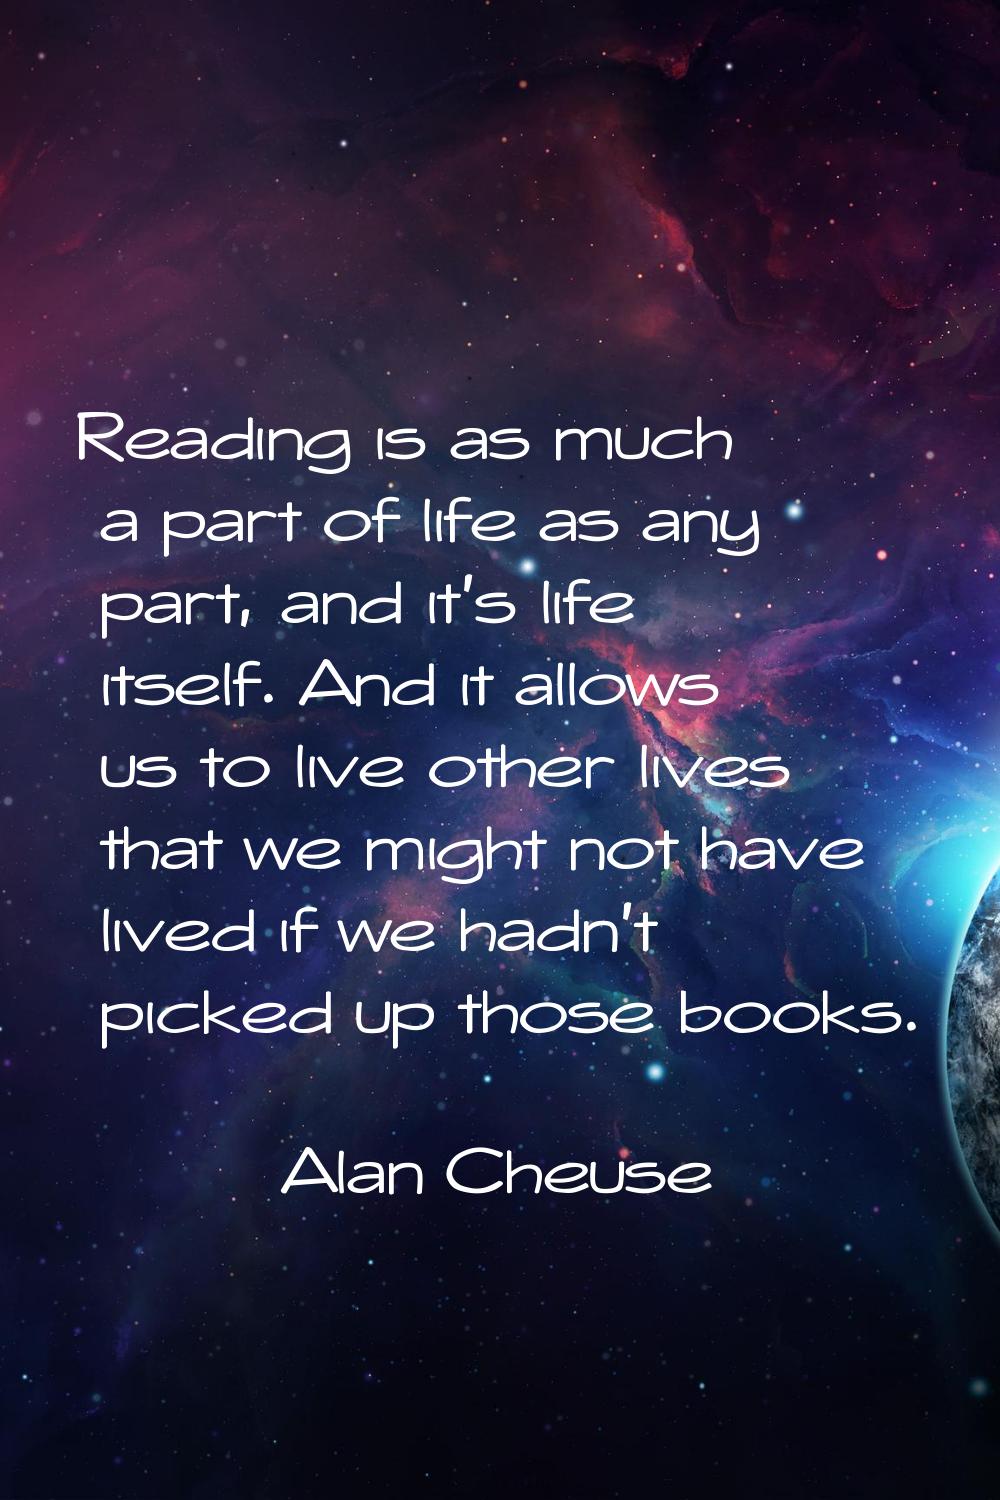 Reading is as much a part of life as any part, and it's life itself. And it allows us to live other